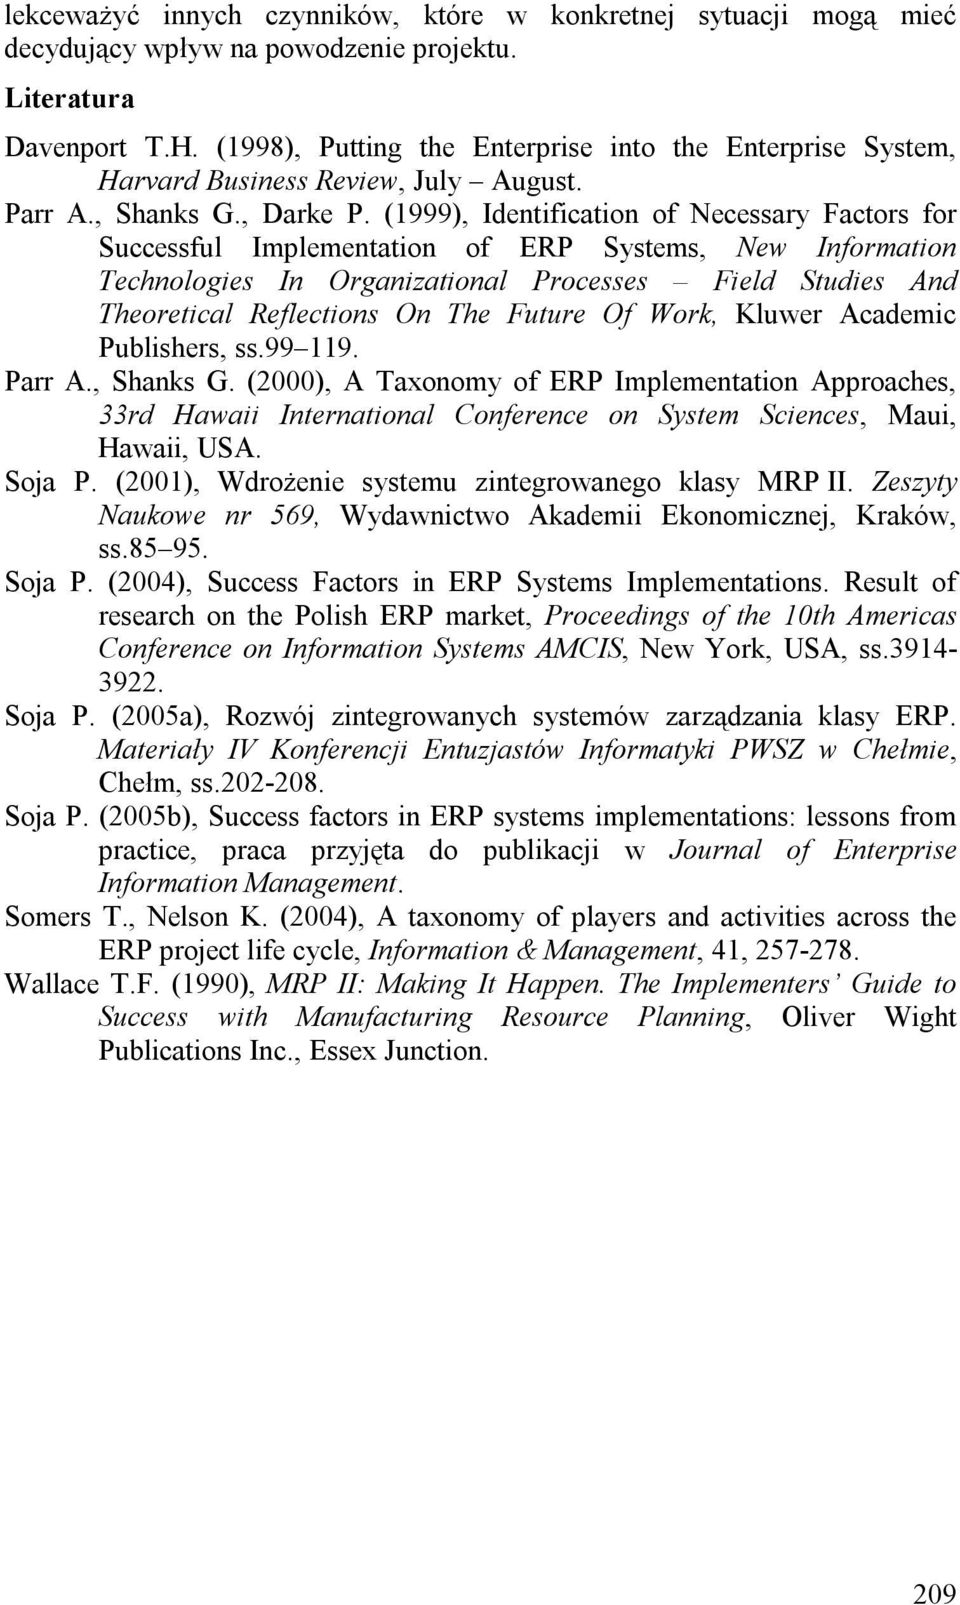 (1999), Identification of Necessary Factors for Successful Implementation of ERP Systems, New Information Technologies In Organizational Processes Field Studies And Theoretical Reflections On The